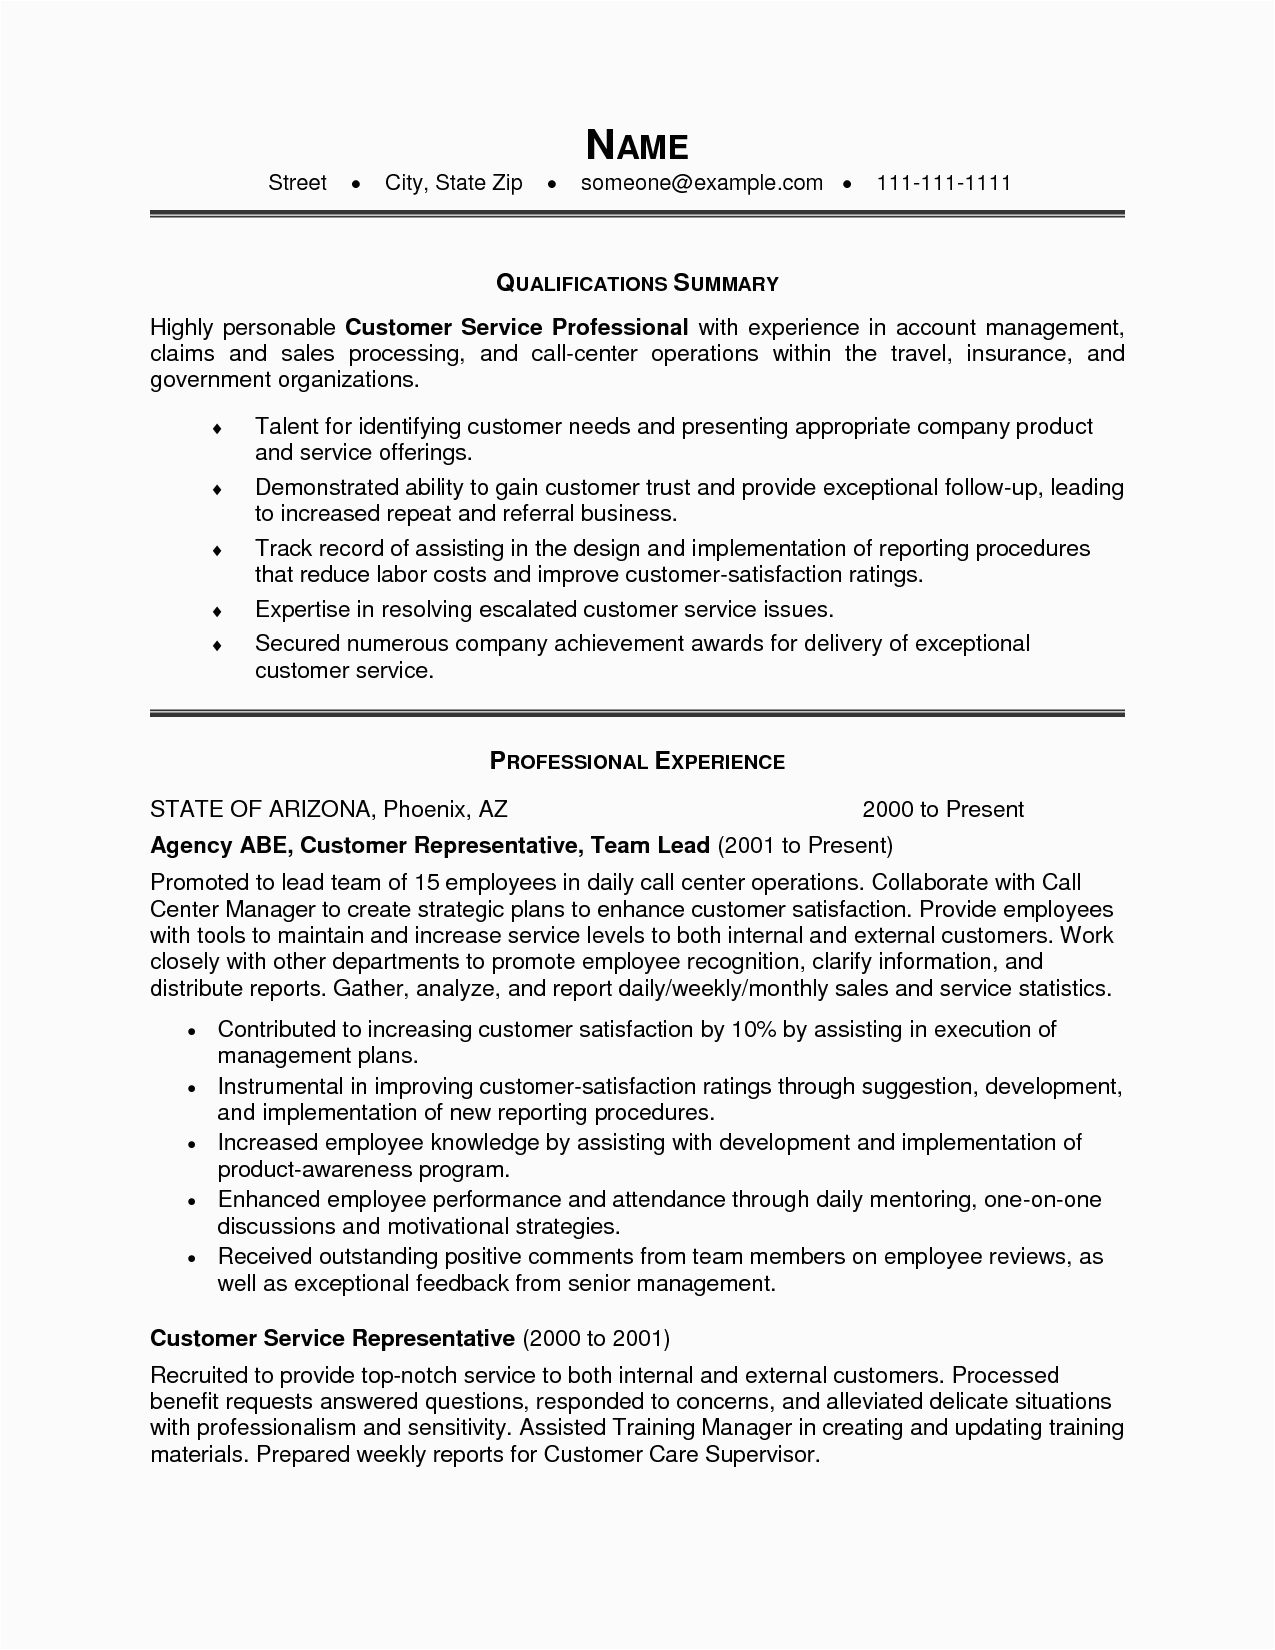 Sample Resume Summary Statements About Experience Resume Summary Examples